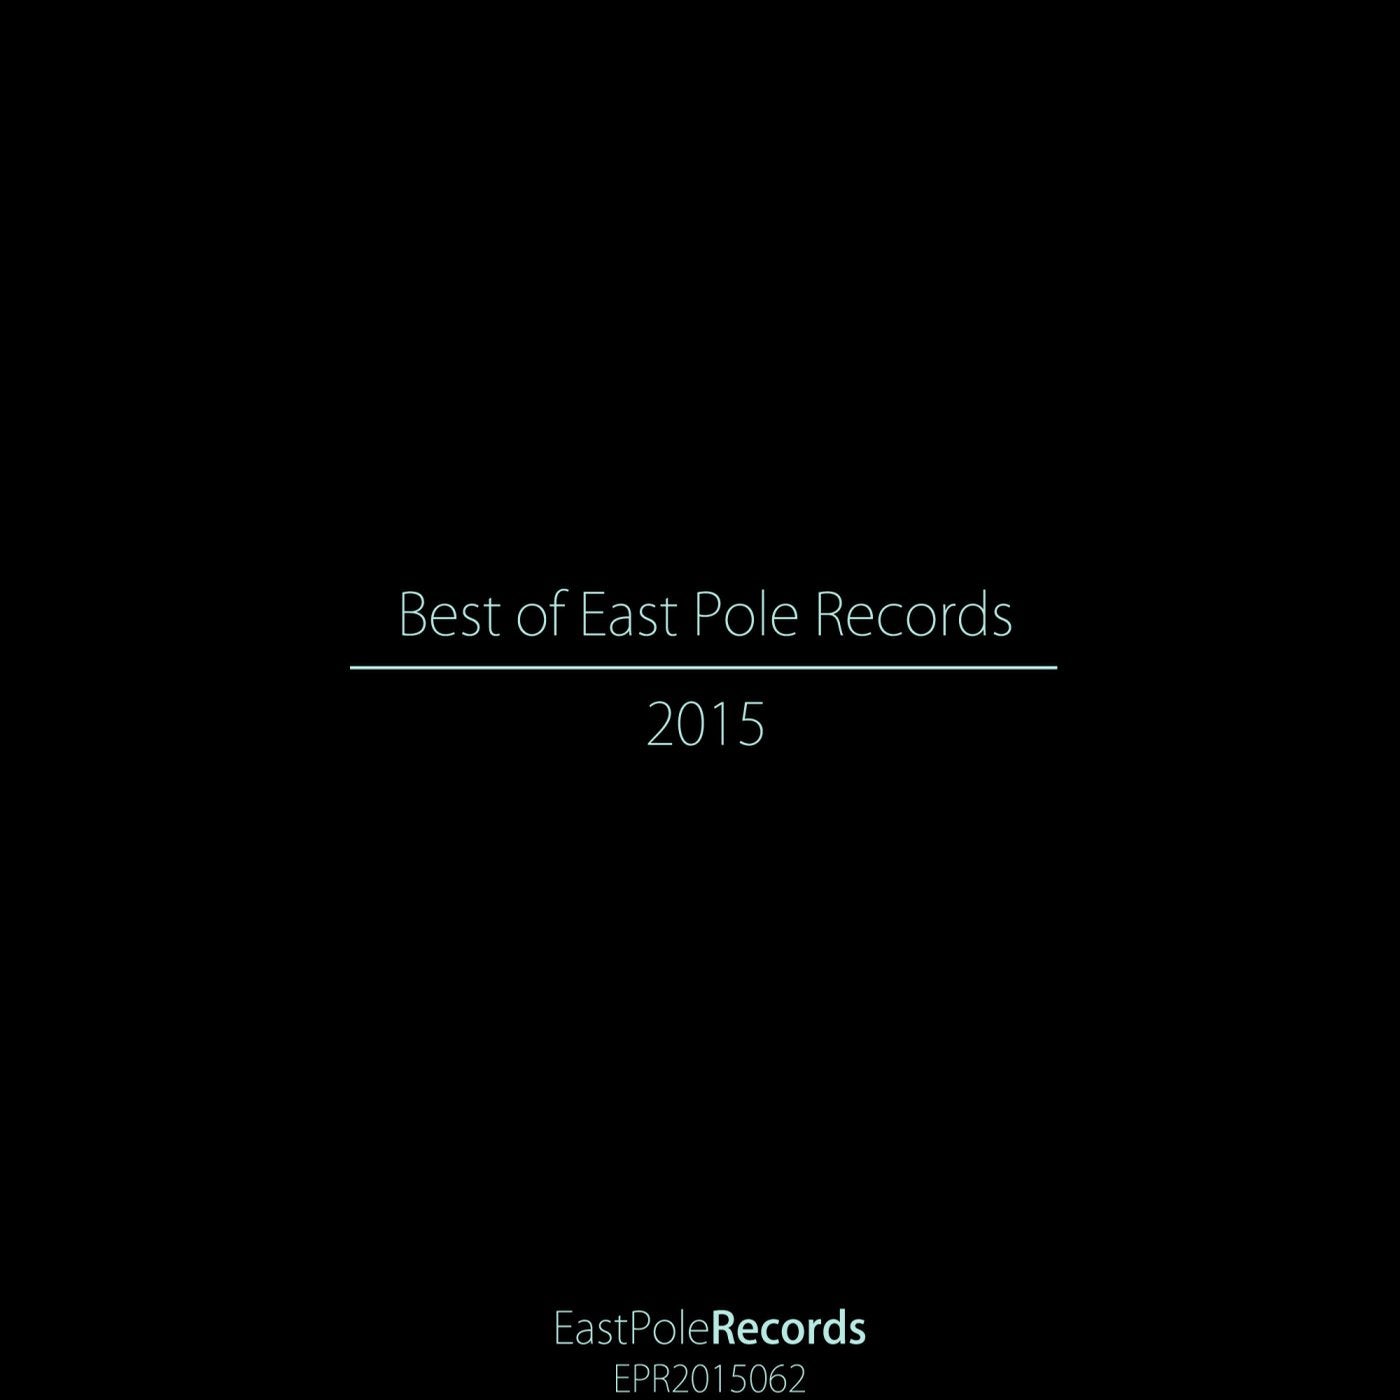 Best of East Pole Records 2015